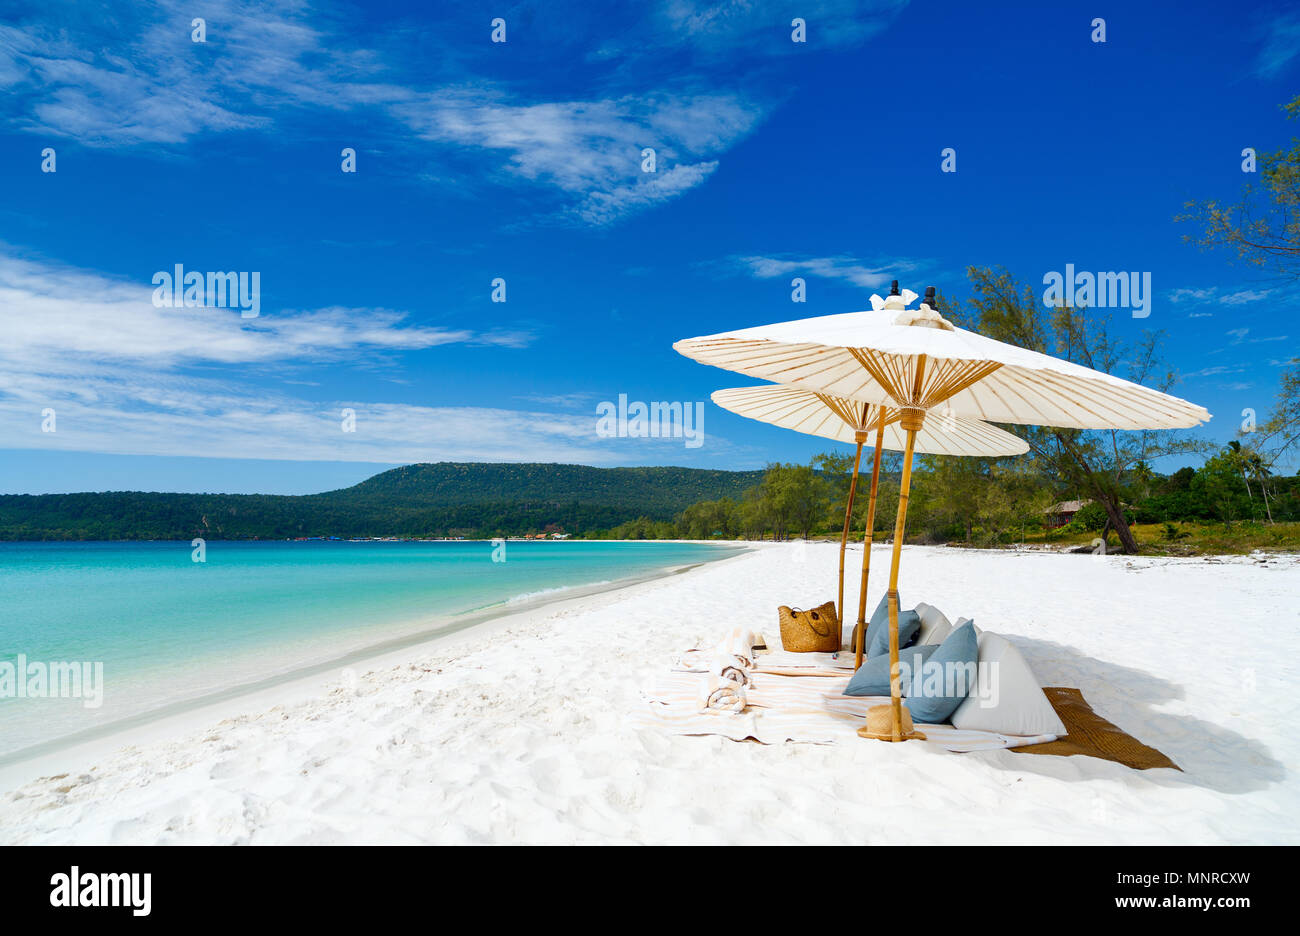 Landscape photo of beautiful white sand exotic beach on Koh Rong island in Cambodia Stock Photo